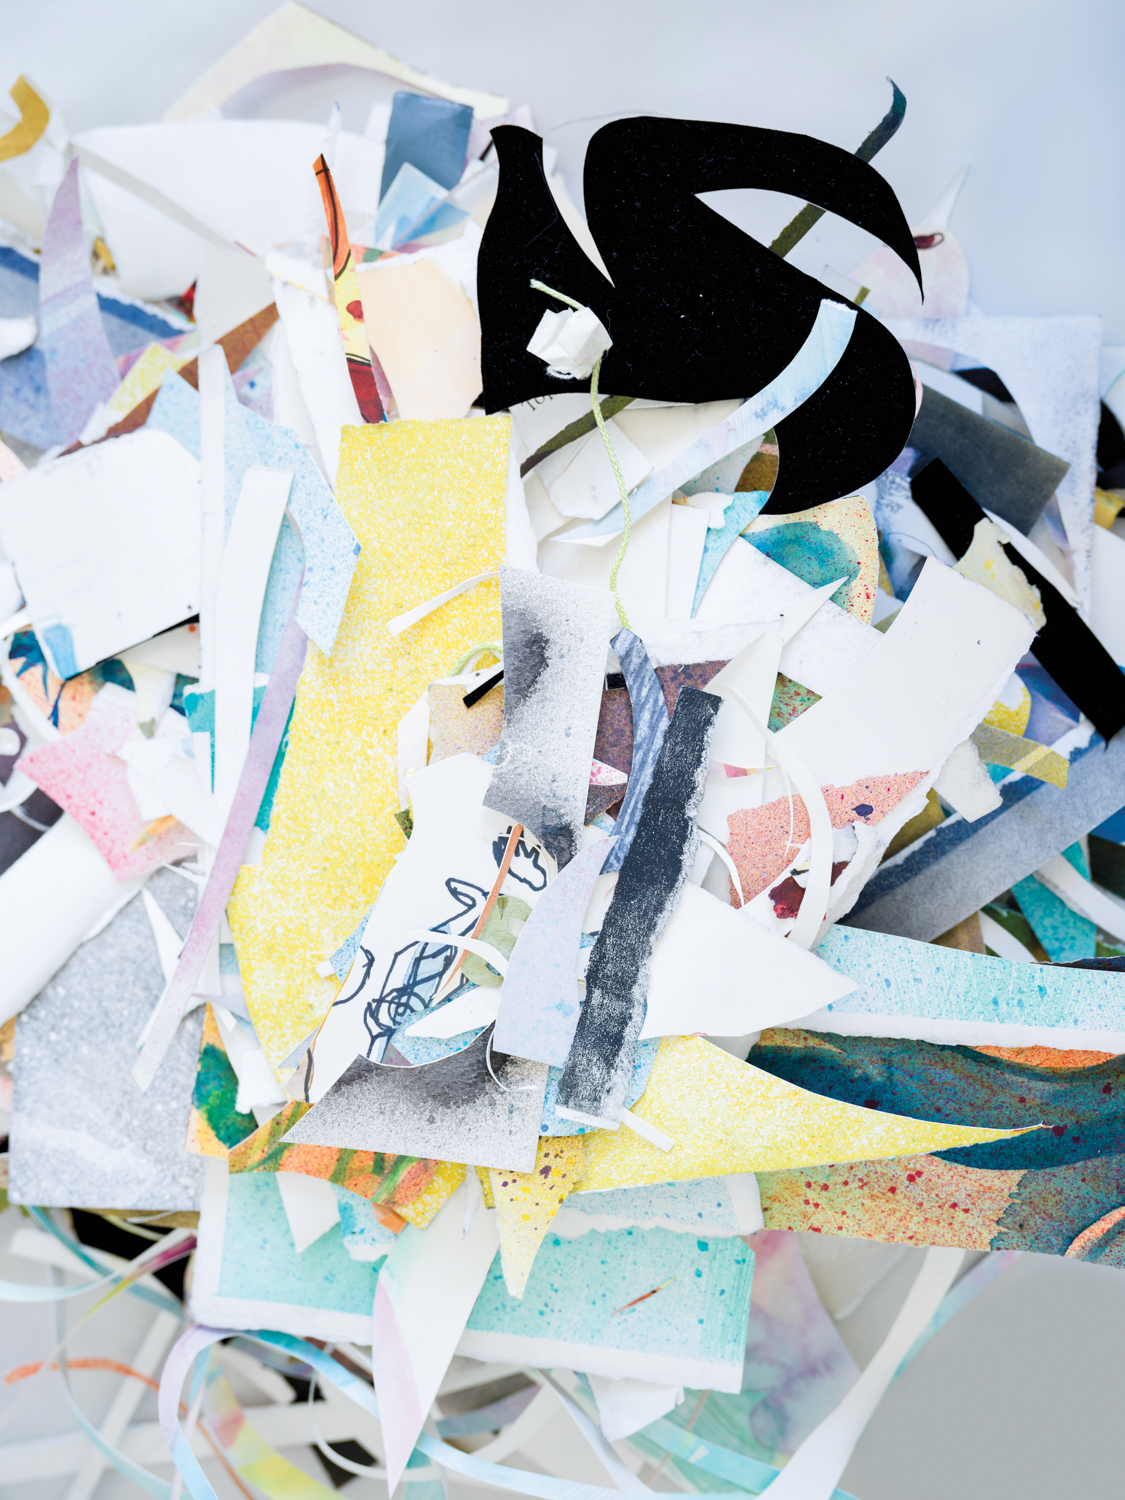 A pile of different-colored paper scraps.